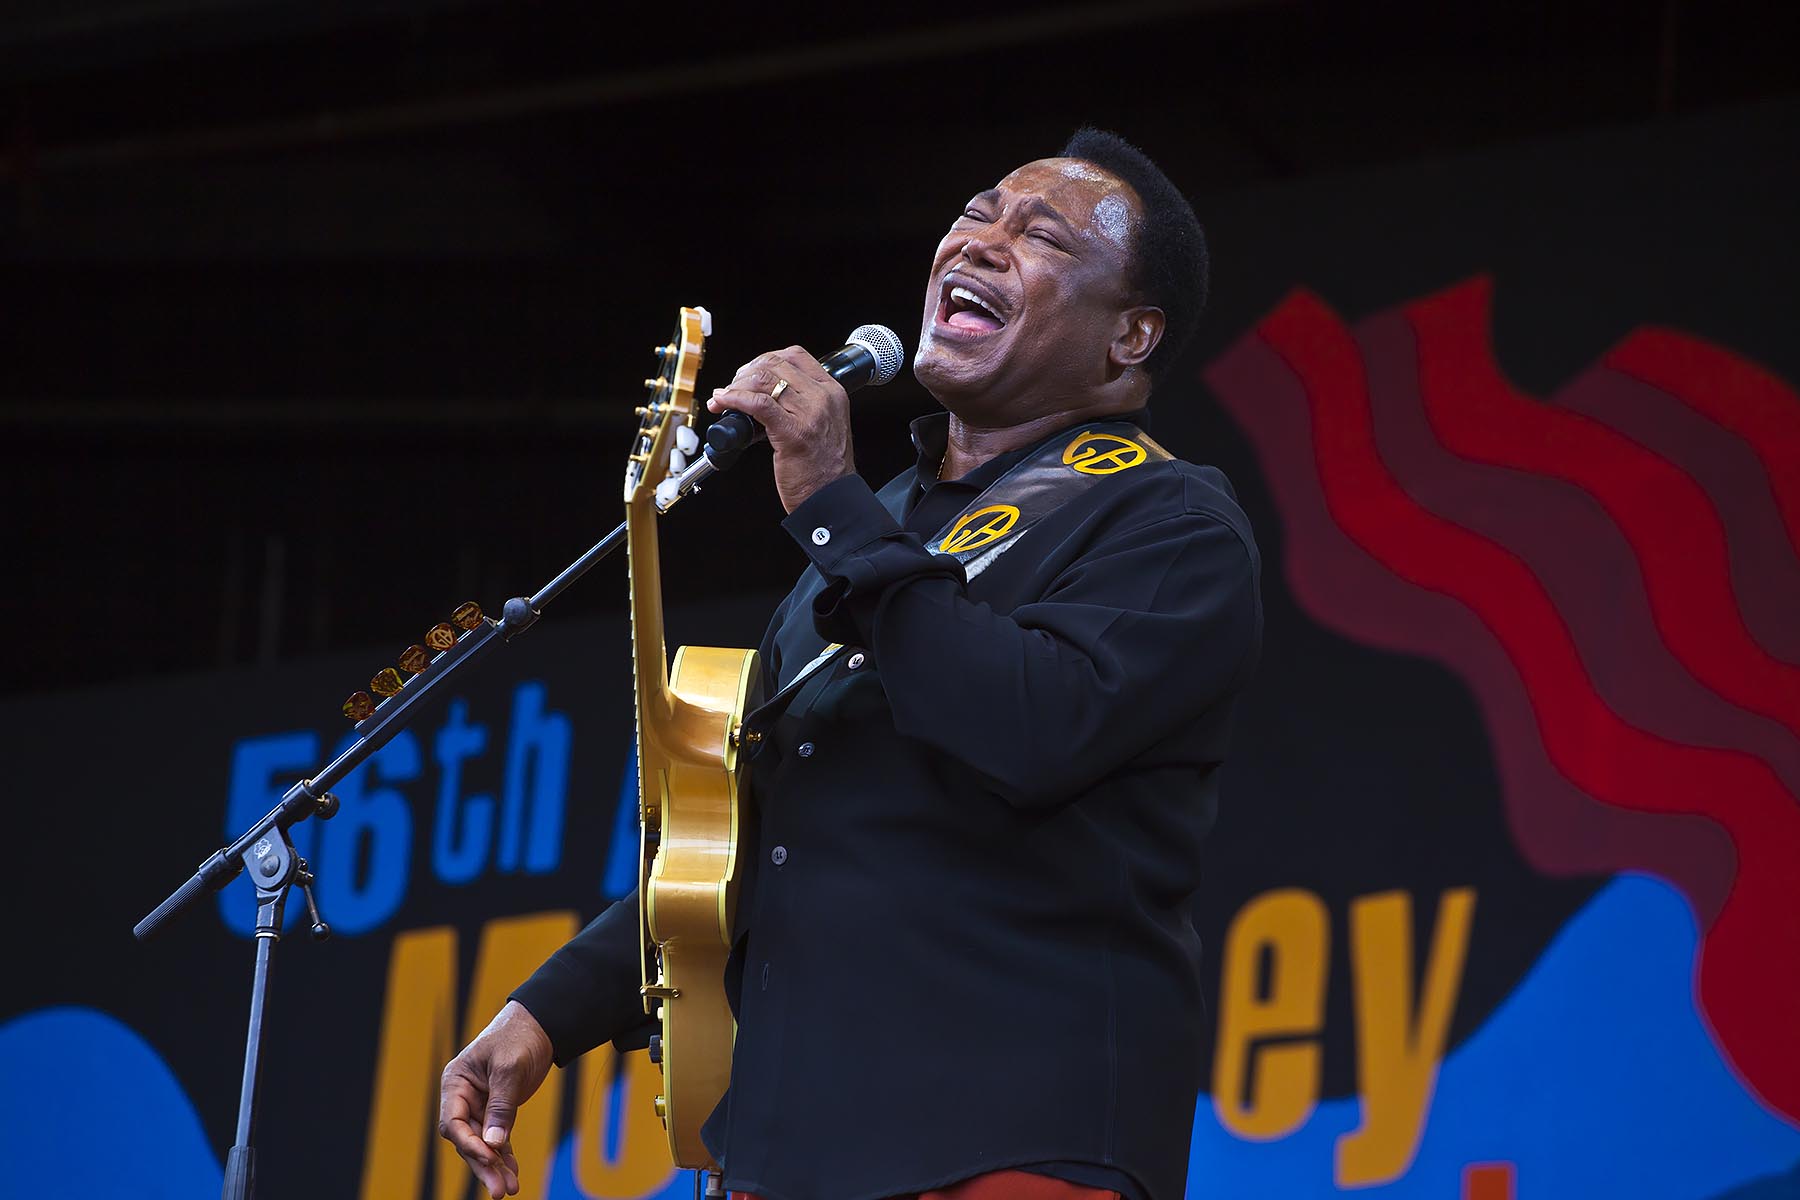 GEORGE BENSON preforms on Jimmy Lyons Stage at the Monterey Jazz Festival - MONTEREY, CALIFORNIA